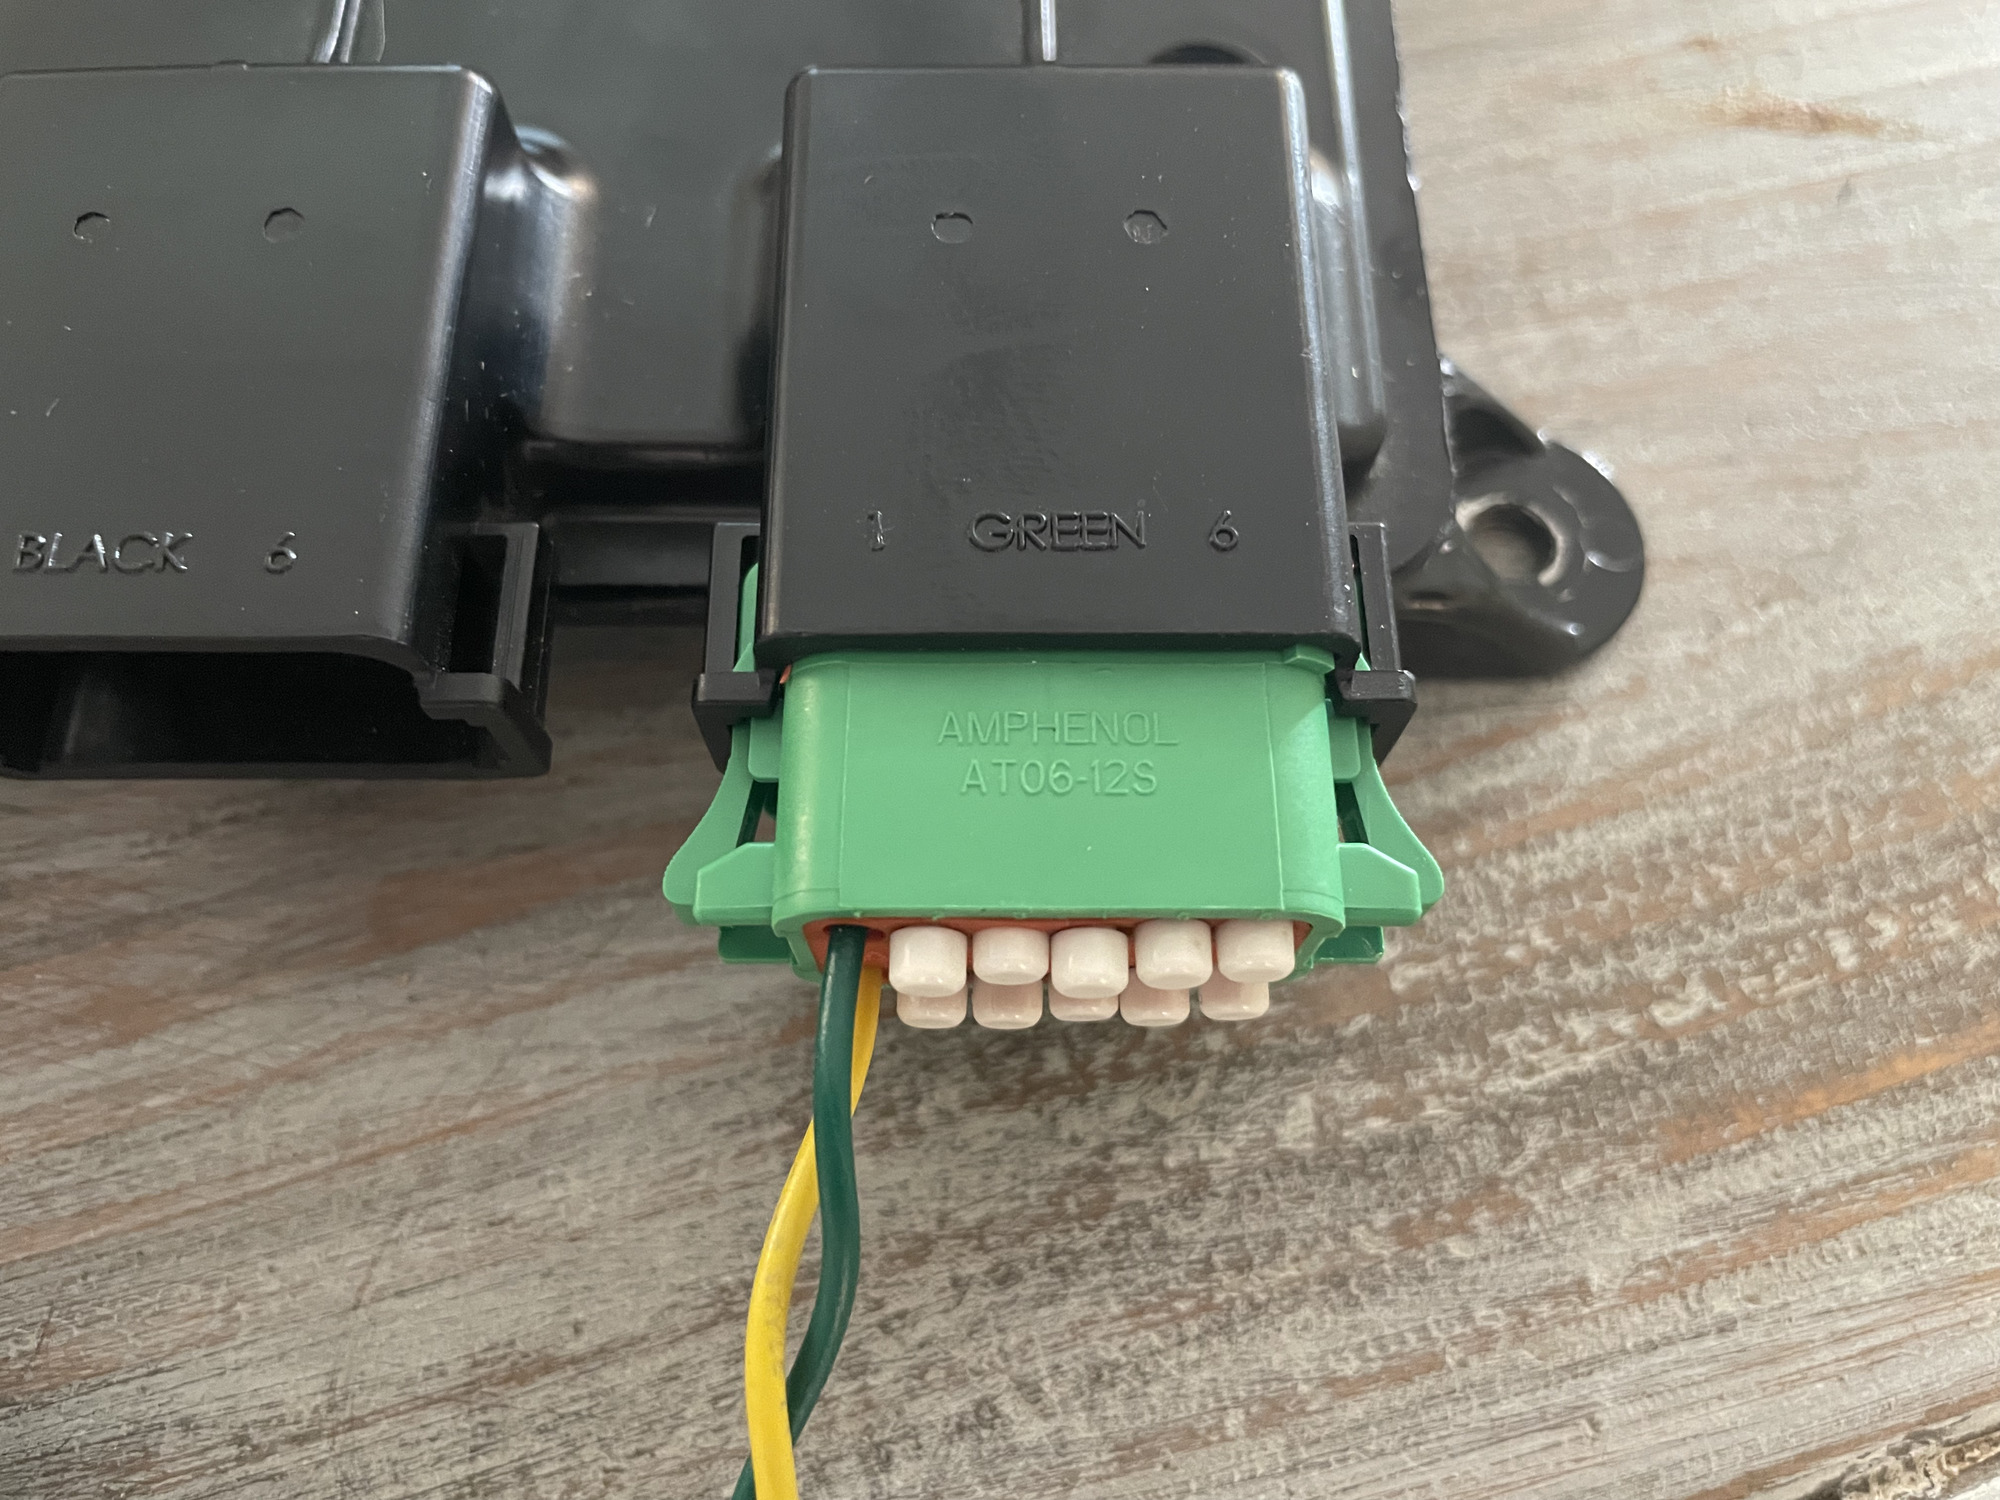 Correct orientation of the green connector with just CAN wires